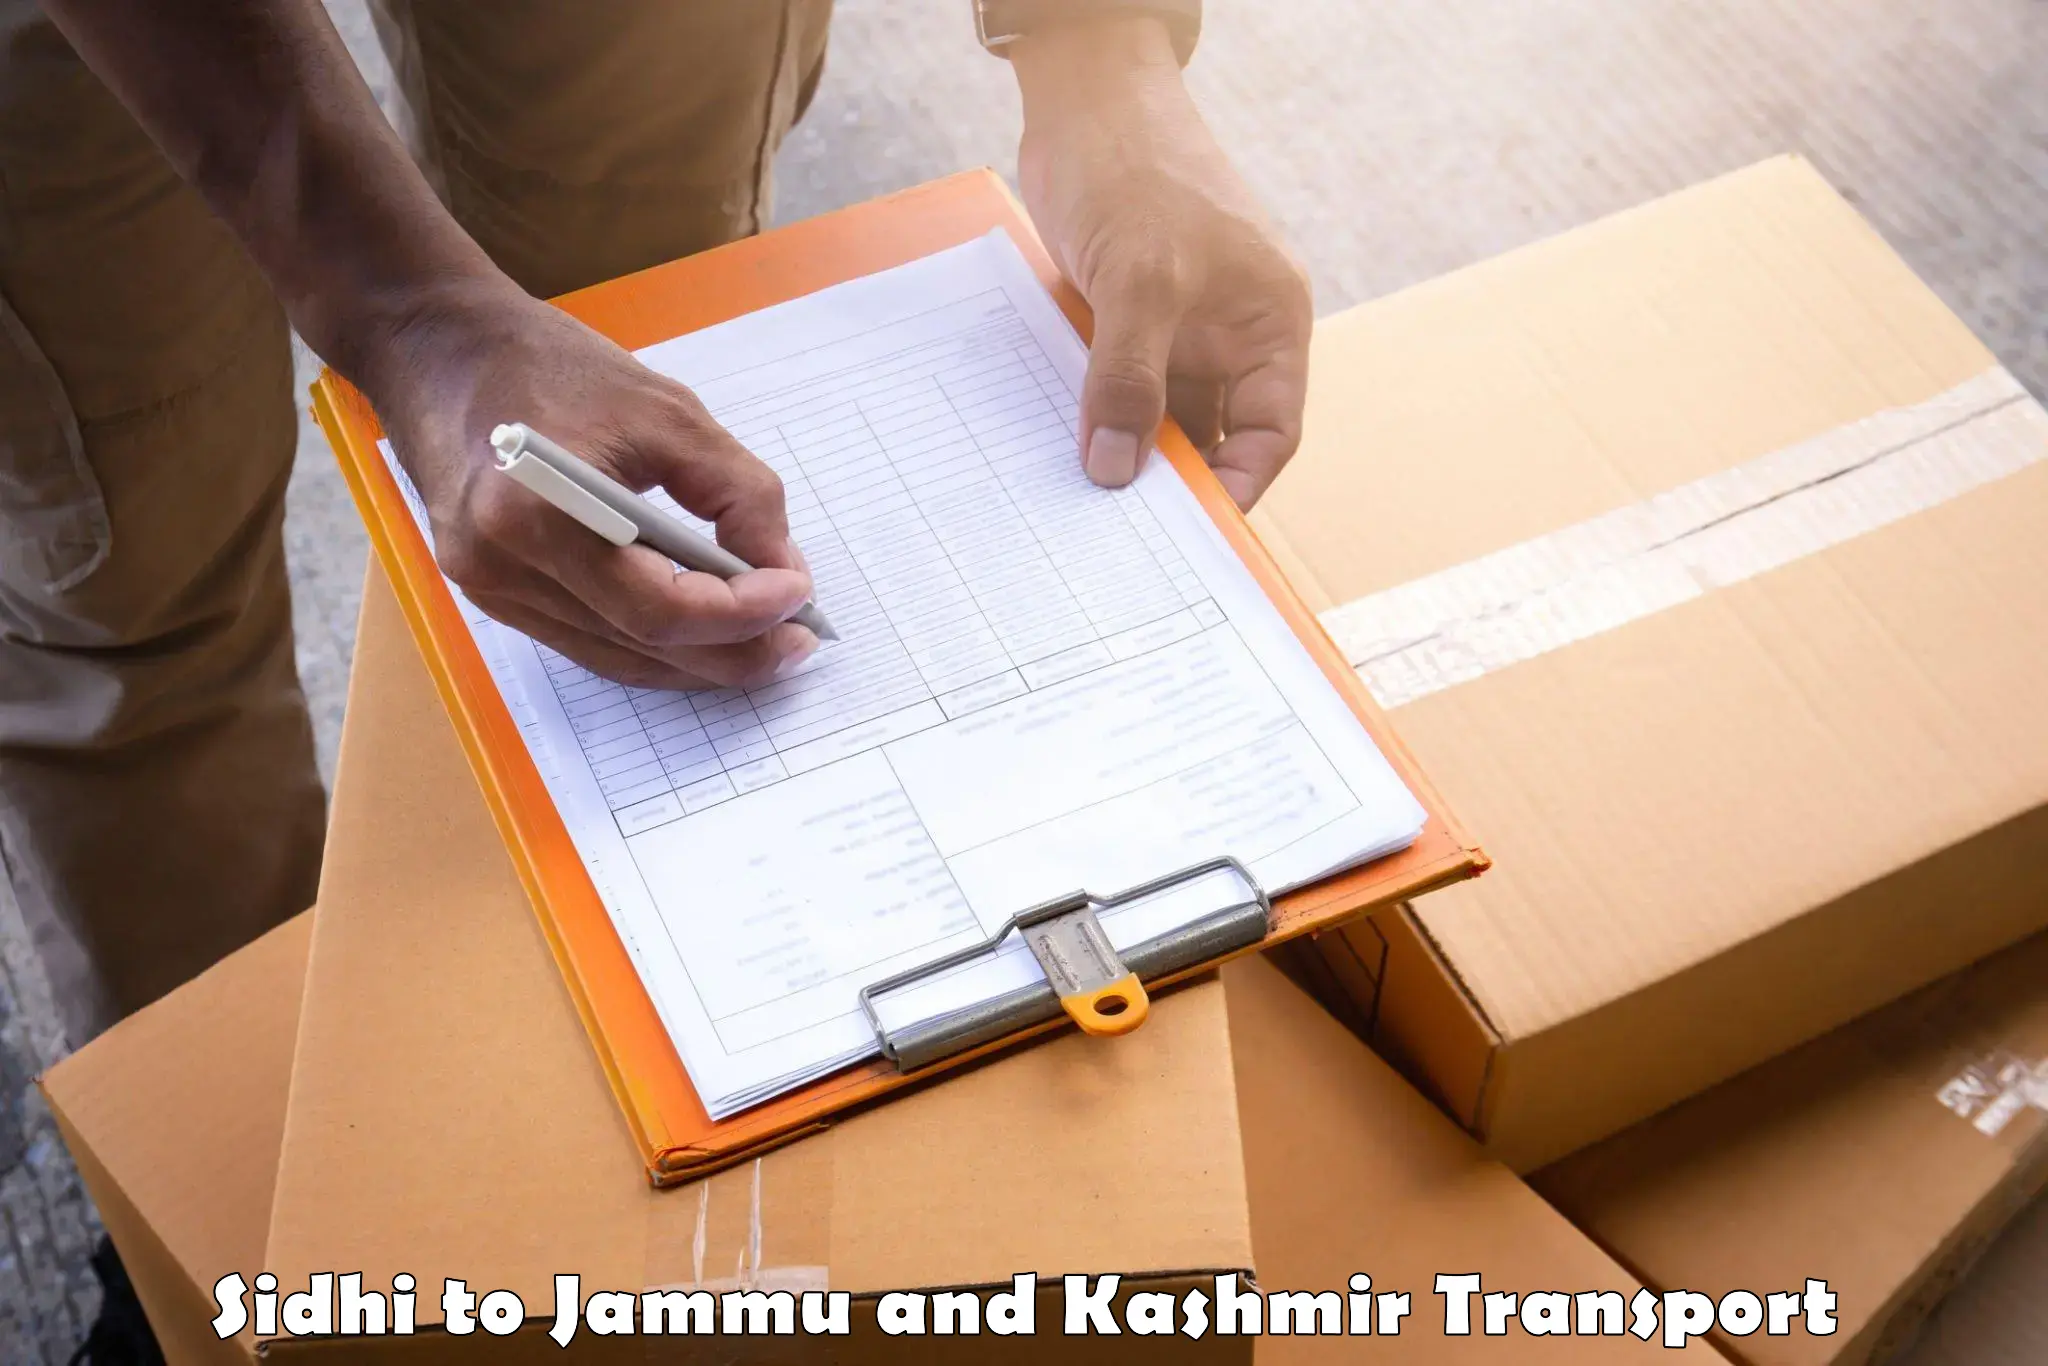 Shipping services Sidhi to University of Jammu